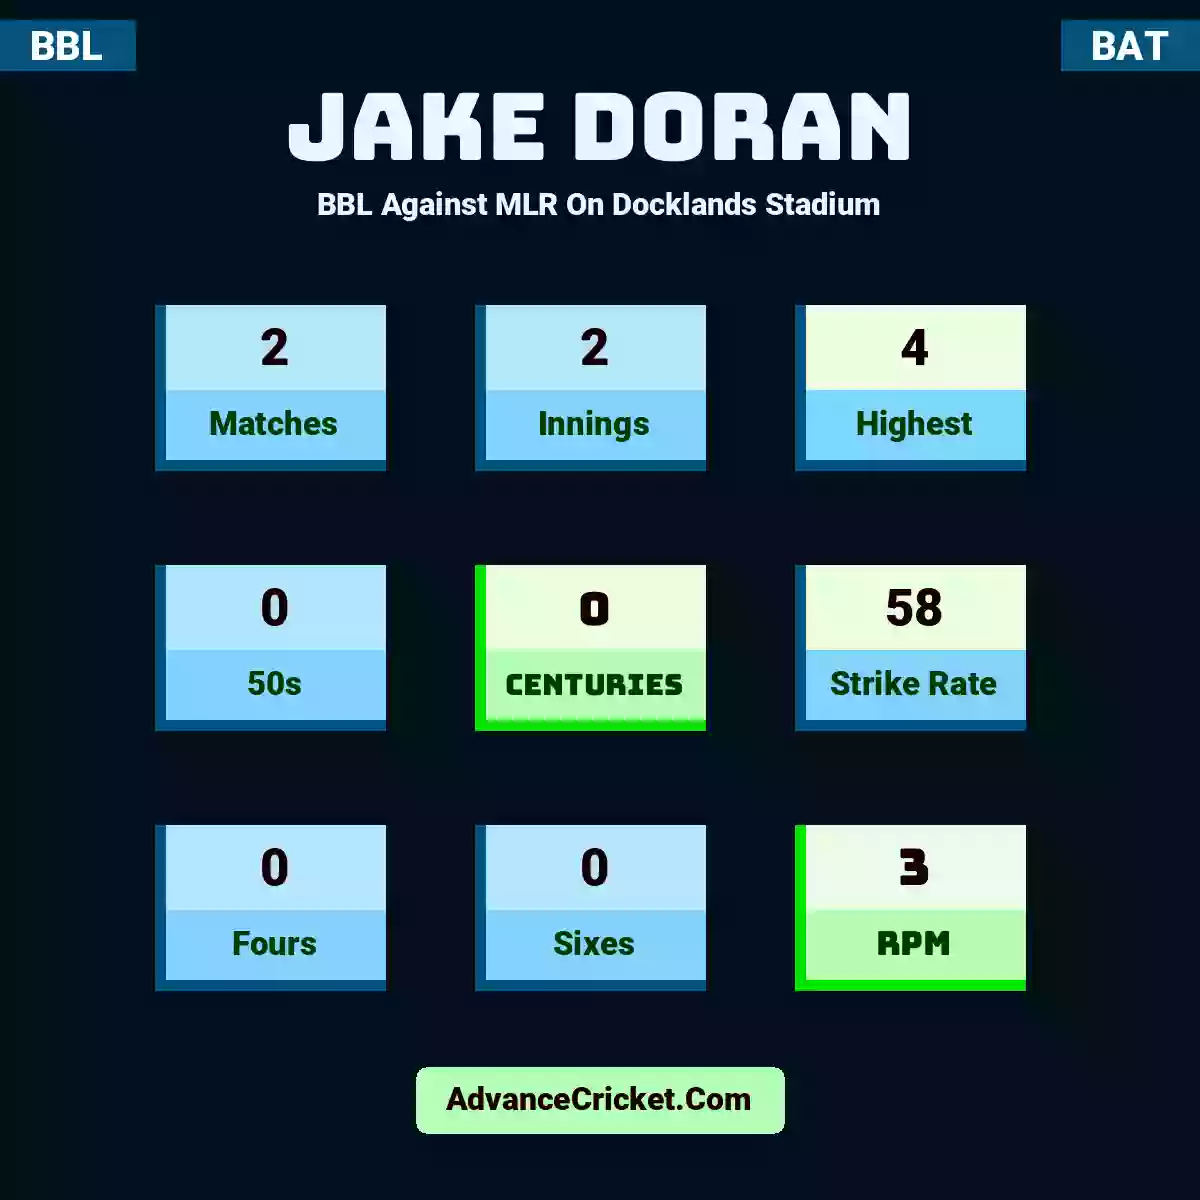 Jake Doran BBL  Against MLR On Docklands Stadium, Jake Doran played 2 matches, scored 4 runs as highest, 0 half-centuries, and 0 centuries, with a strike rate of 58. J.Doran hit 0 fours and 0 sixes, with an RPM of 3.